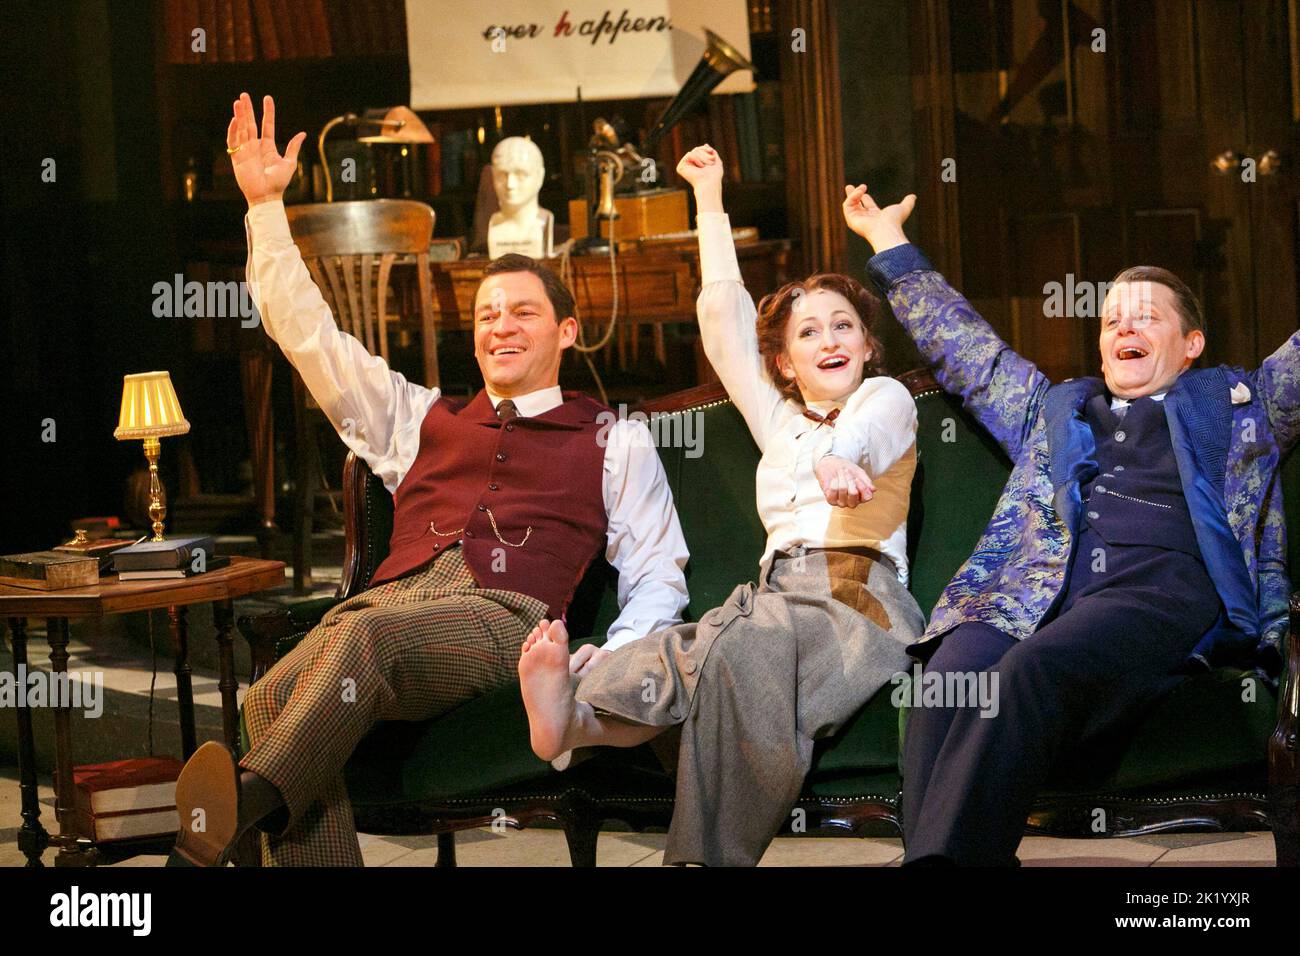 'The Rain in Spain' - l-r: Dominic West (Professor Higgins), Carly Bawden (Eliza Doolittle), Anthony Calf (Colonel Pickering) in MY FAIR LADY at the Crucible Theatre, Sheffield, England  18/12/2012  book & lyrics: Alan Jay Lerner  music: Frederick Loewe  based on G B Shaw's 'Pygmalion'  design: Paul Wills  lighting: Tim Mitchell  director: Daniel Evans Stock Photo